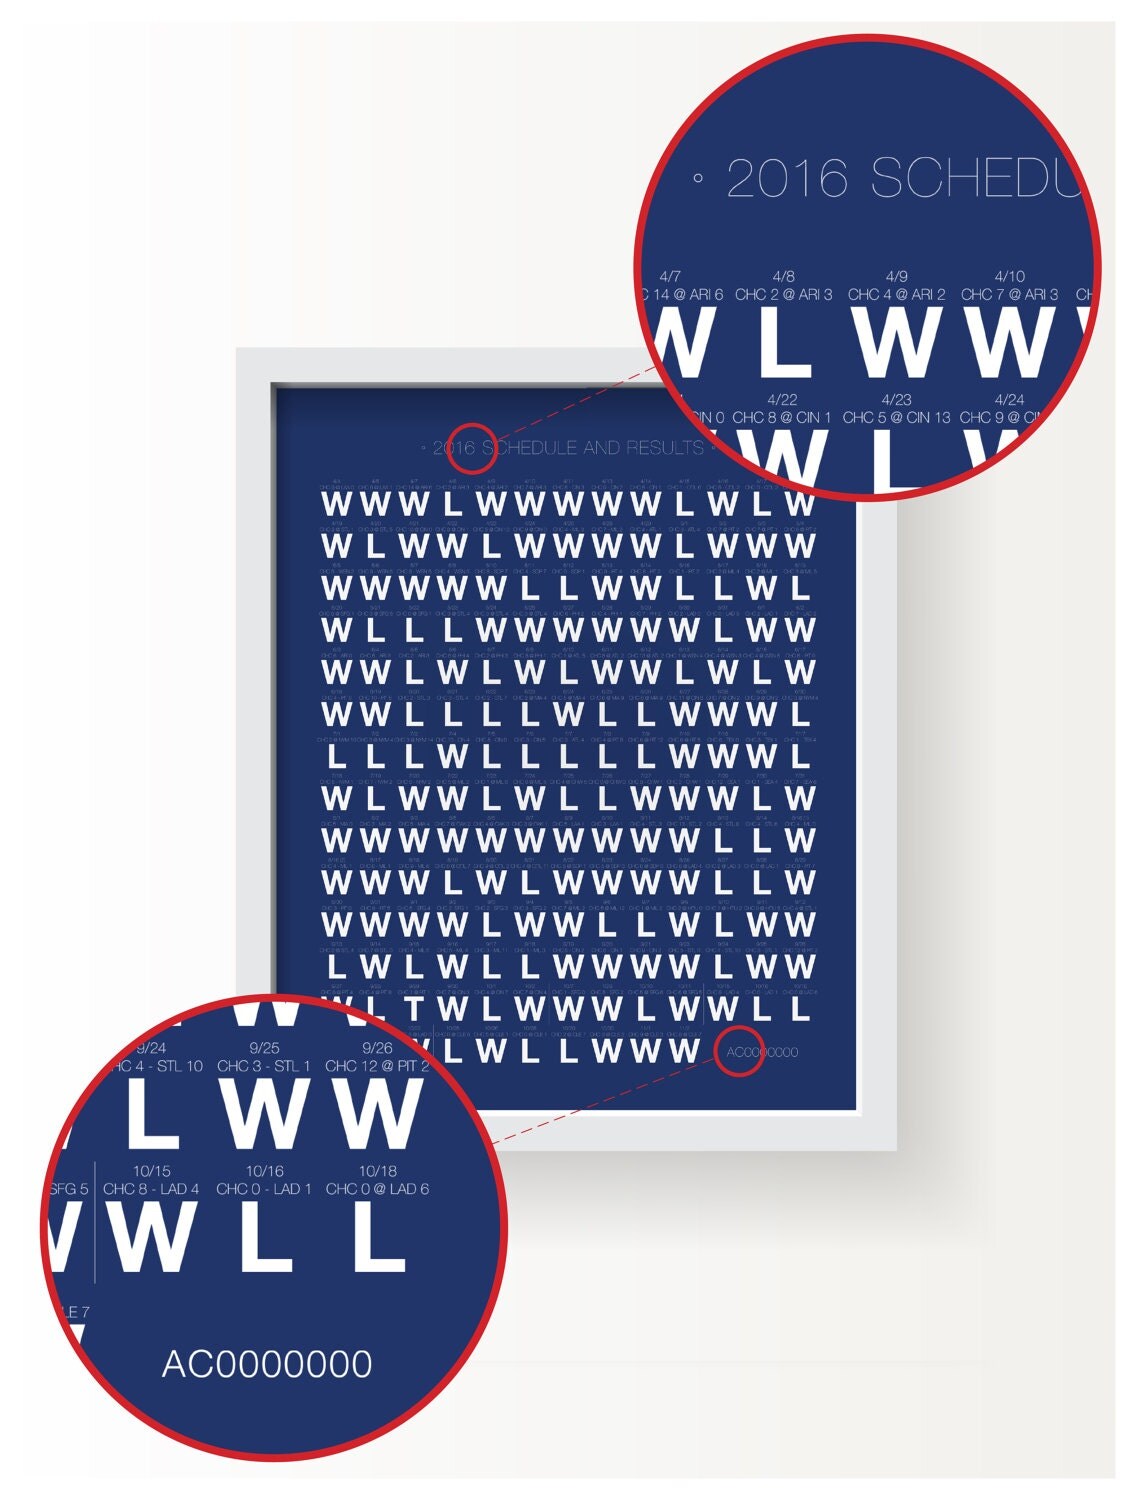 Chicago Cubs 2016 Calendar and Results Graphic by BirdsEyePrints